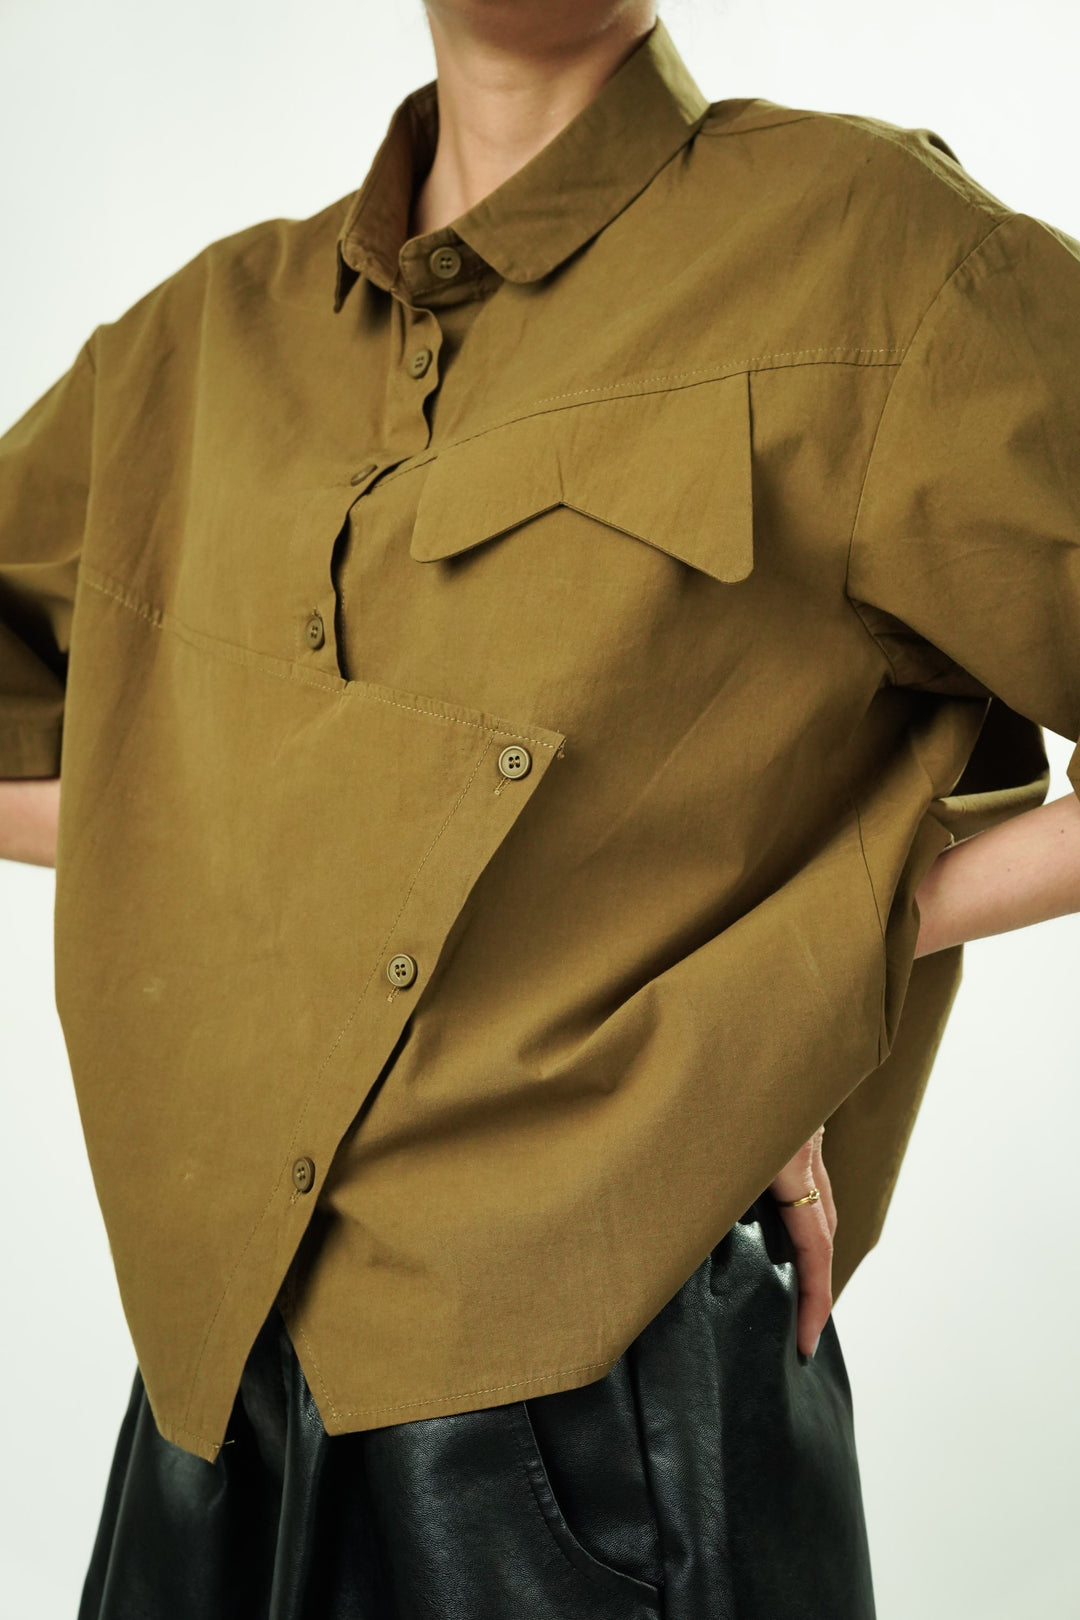 Oversized olive green shirt for streetwear